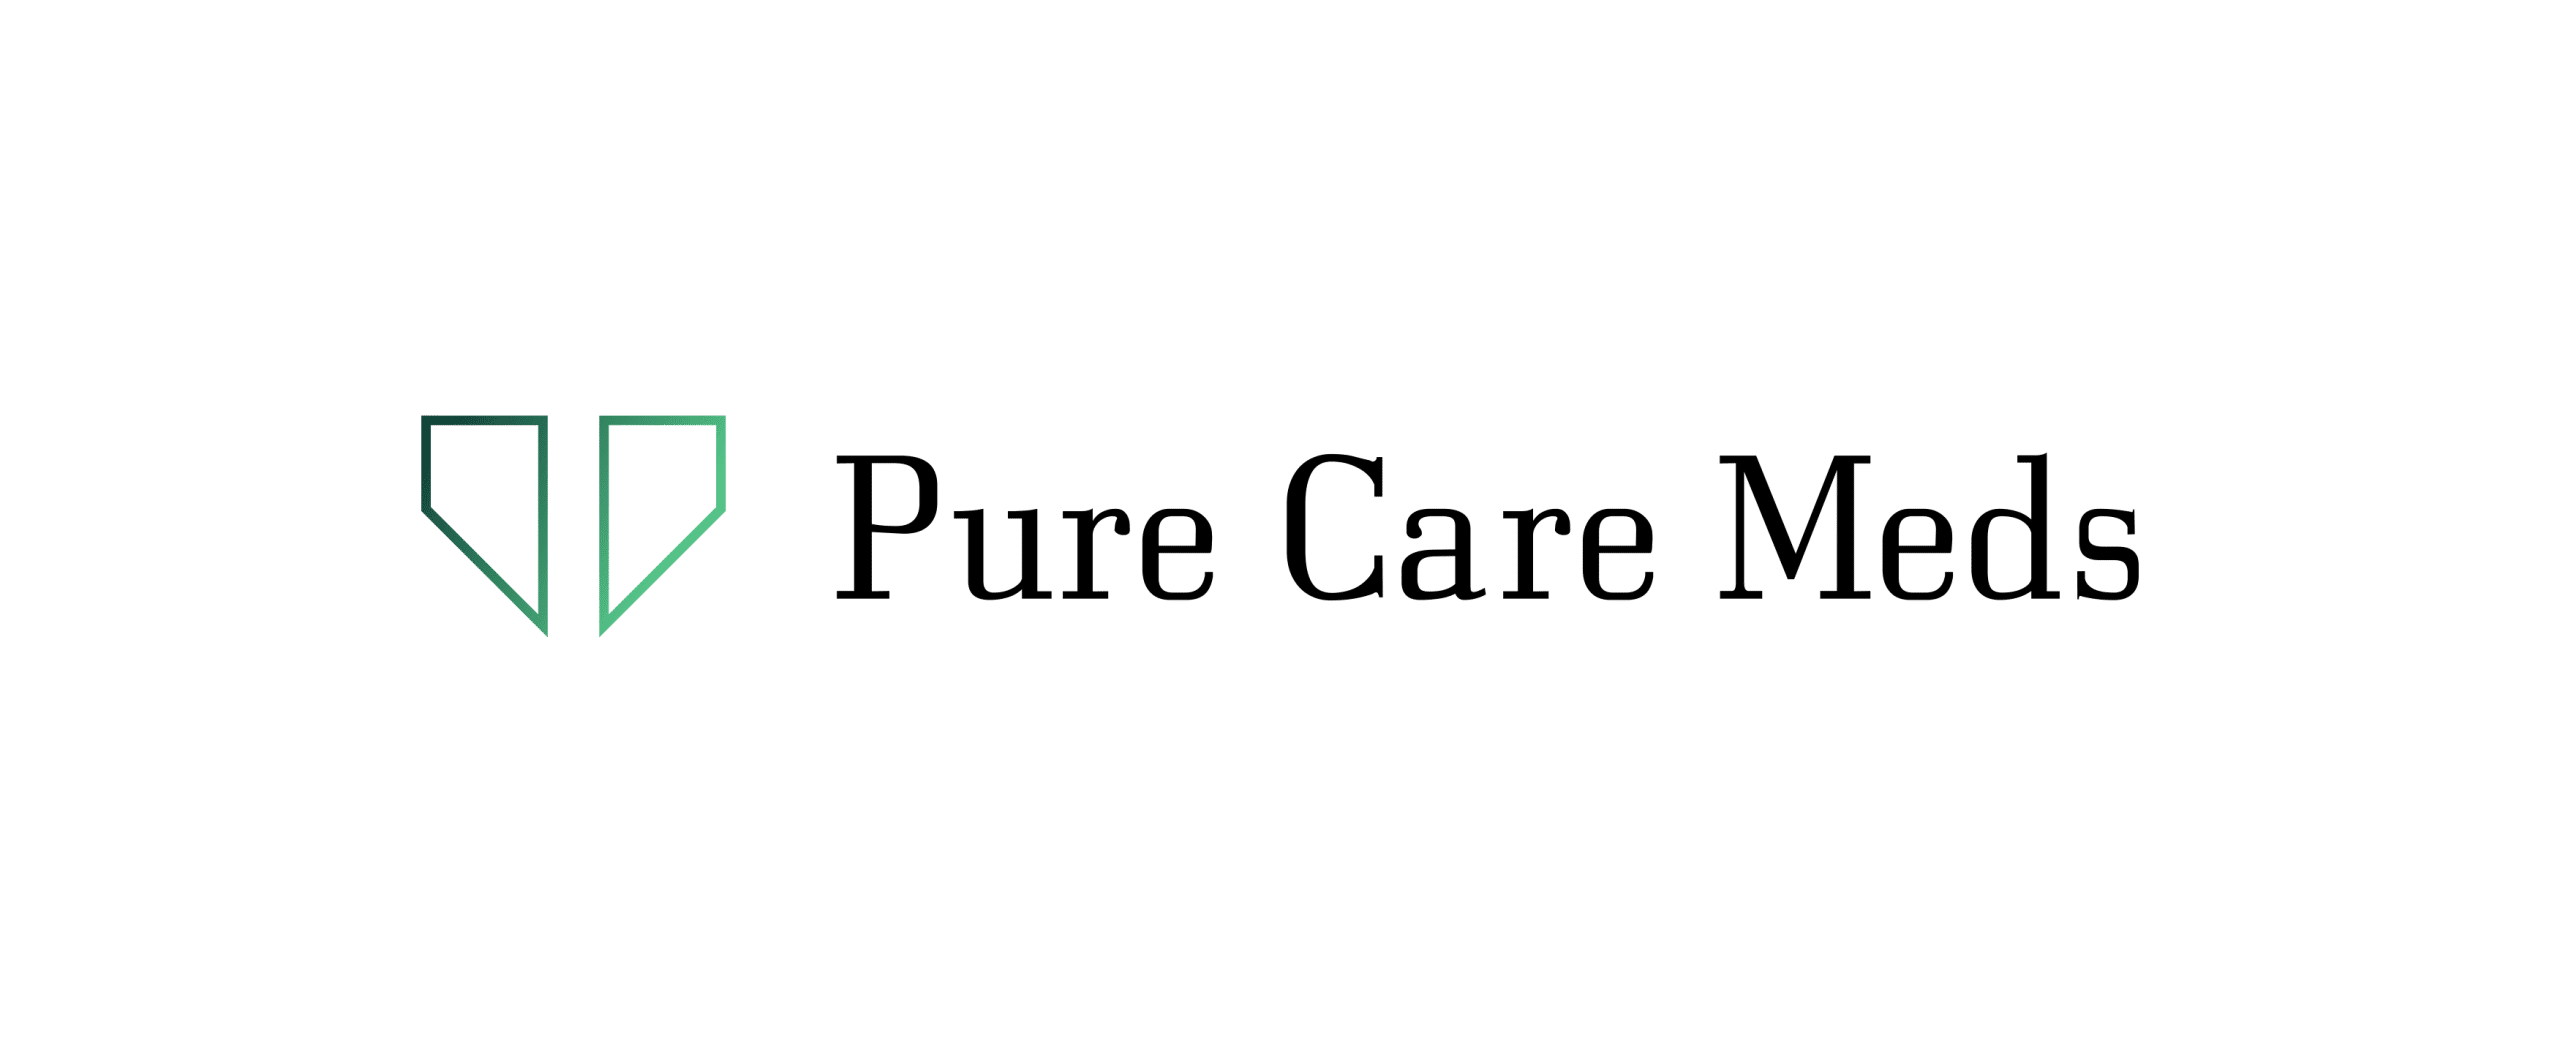 Pure Care Meds